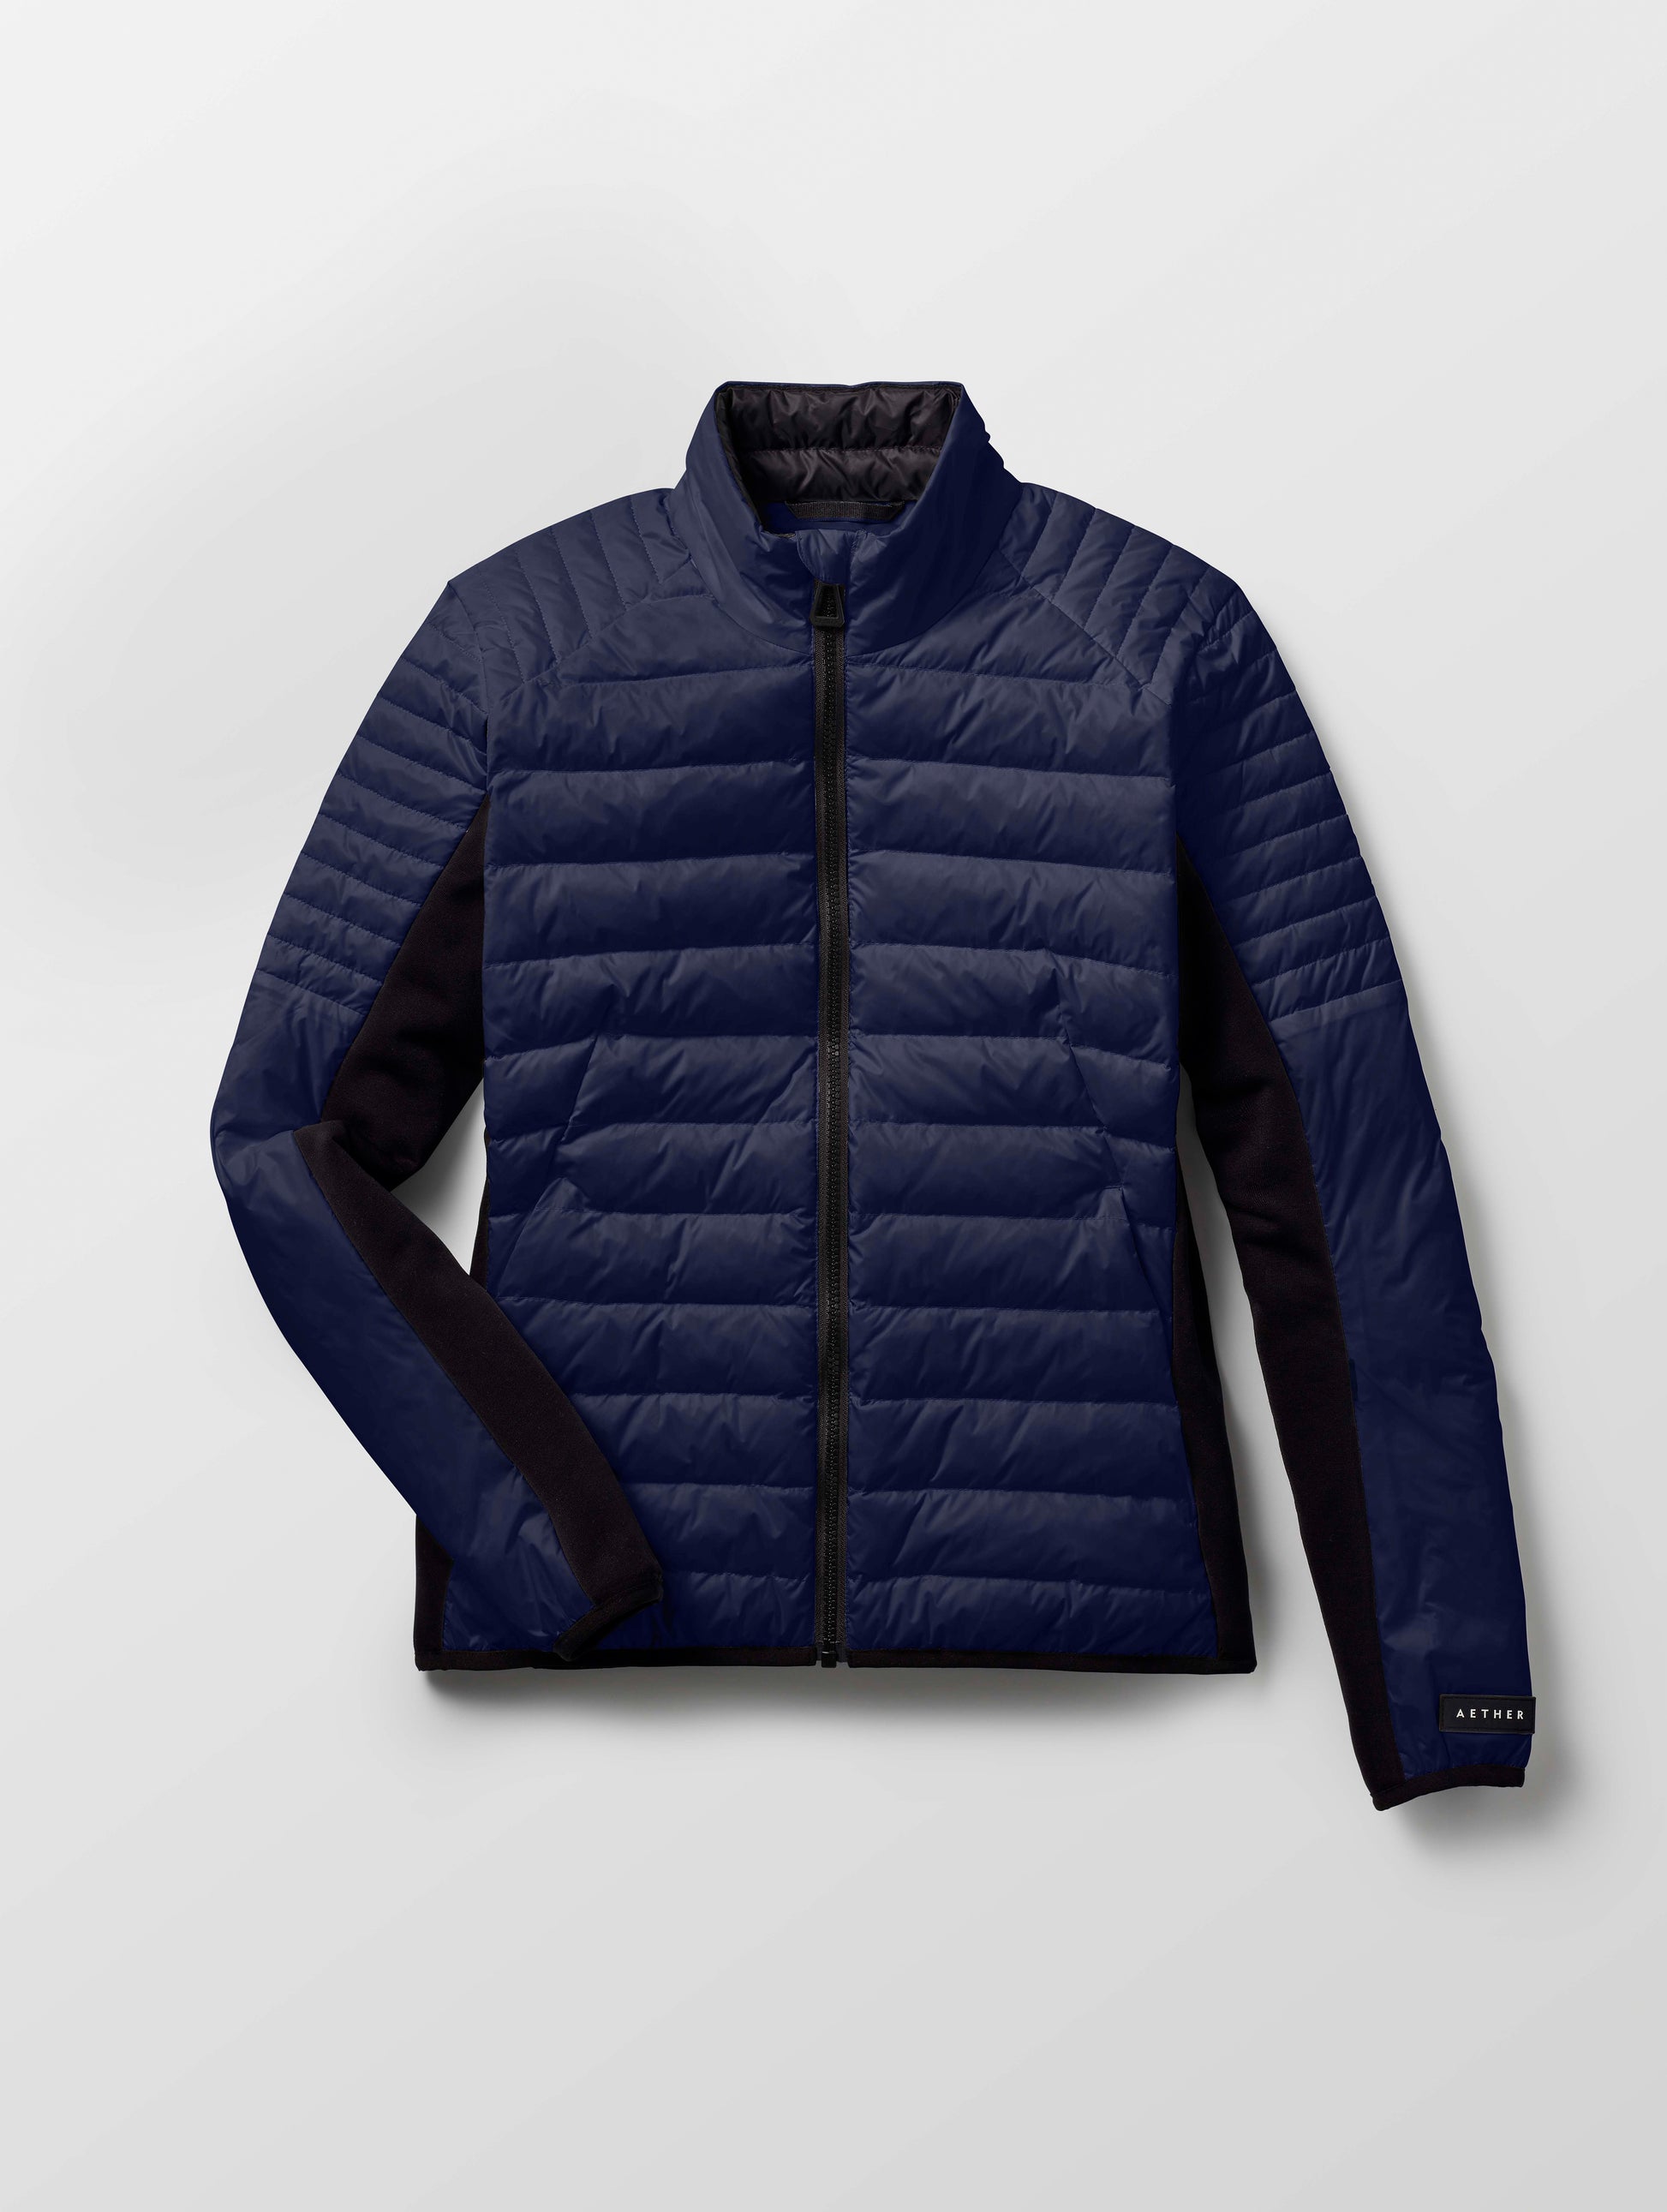 wearing quilted blue jacket for women